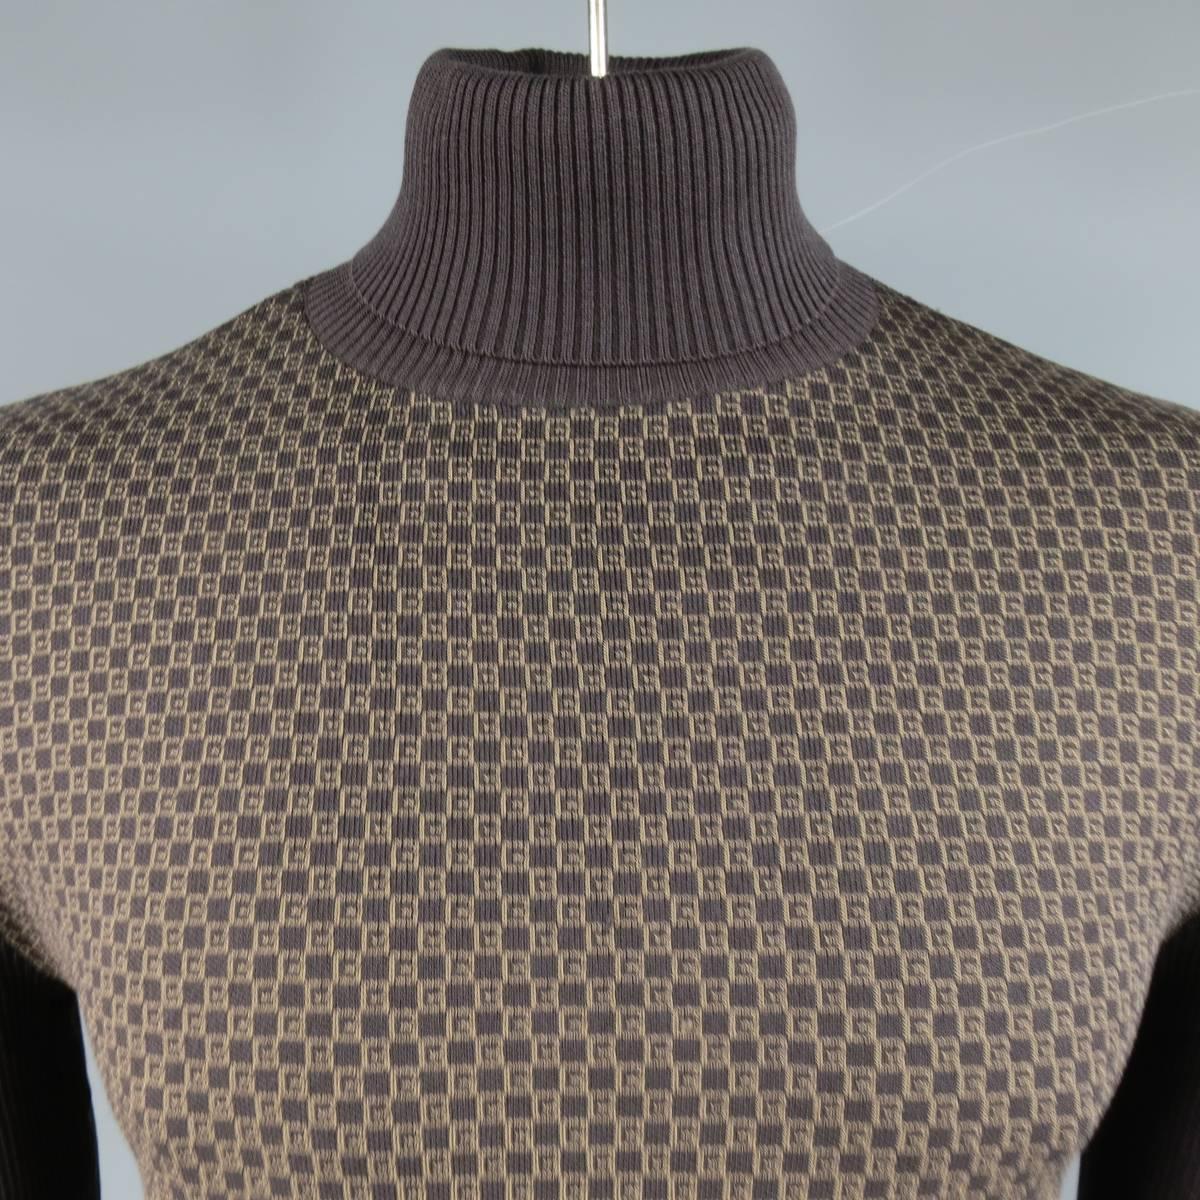 Chocolate brown ribbed silk knit turtleneck by GUCCI featuring a G tan monogram print frontal panel. Made in Italy.
 
Excellent Pre-Owned Condition.
Marked: L
 
Measurements:
 
Shoulder: 19 in.
Chest: 44 in.
Sleeve: 27 in.
Length: 25 in.